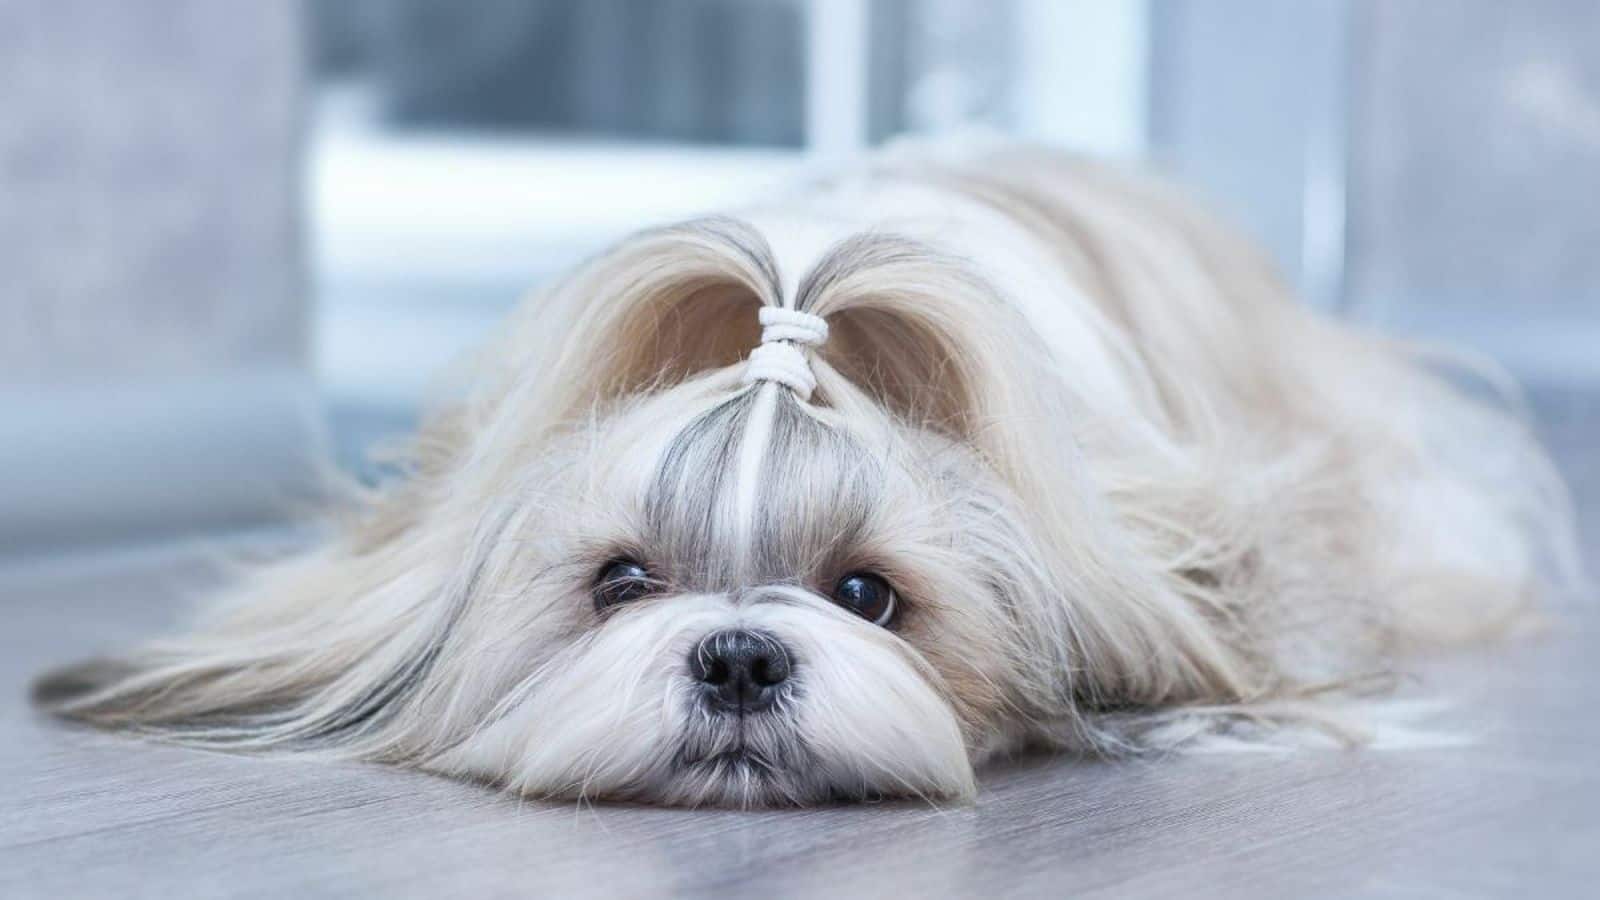 Essential eye care tips for your Shih Tzu